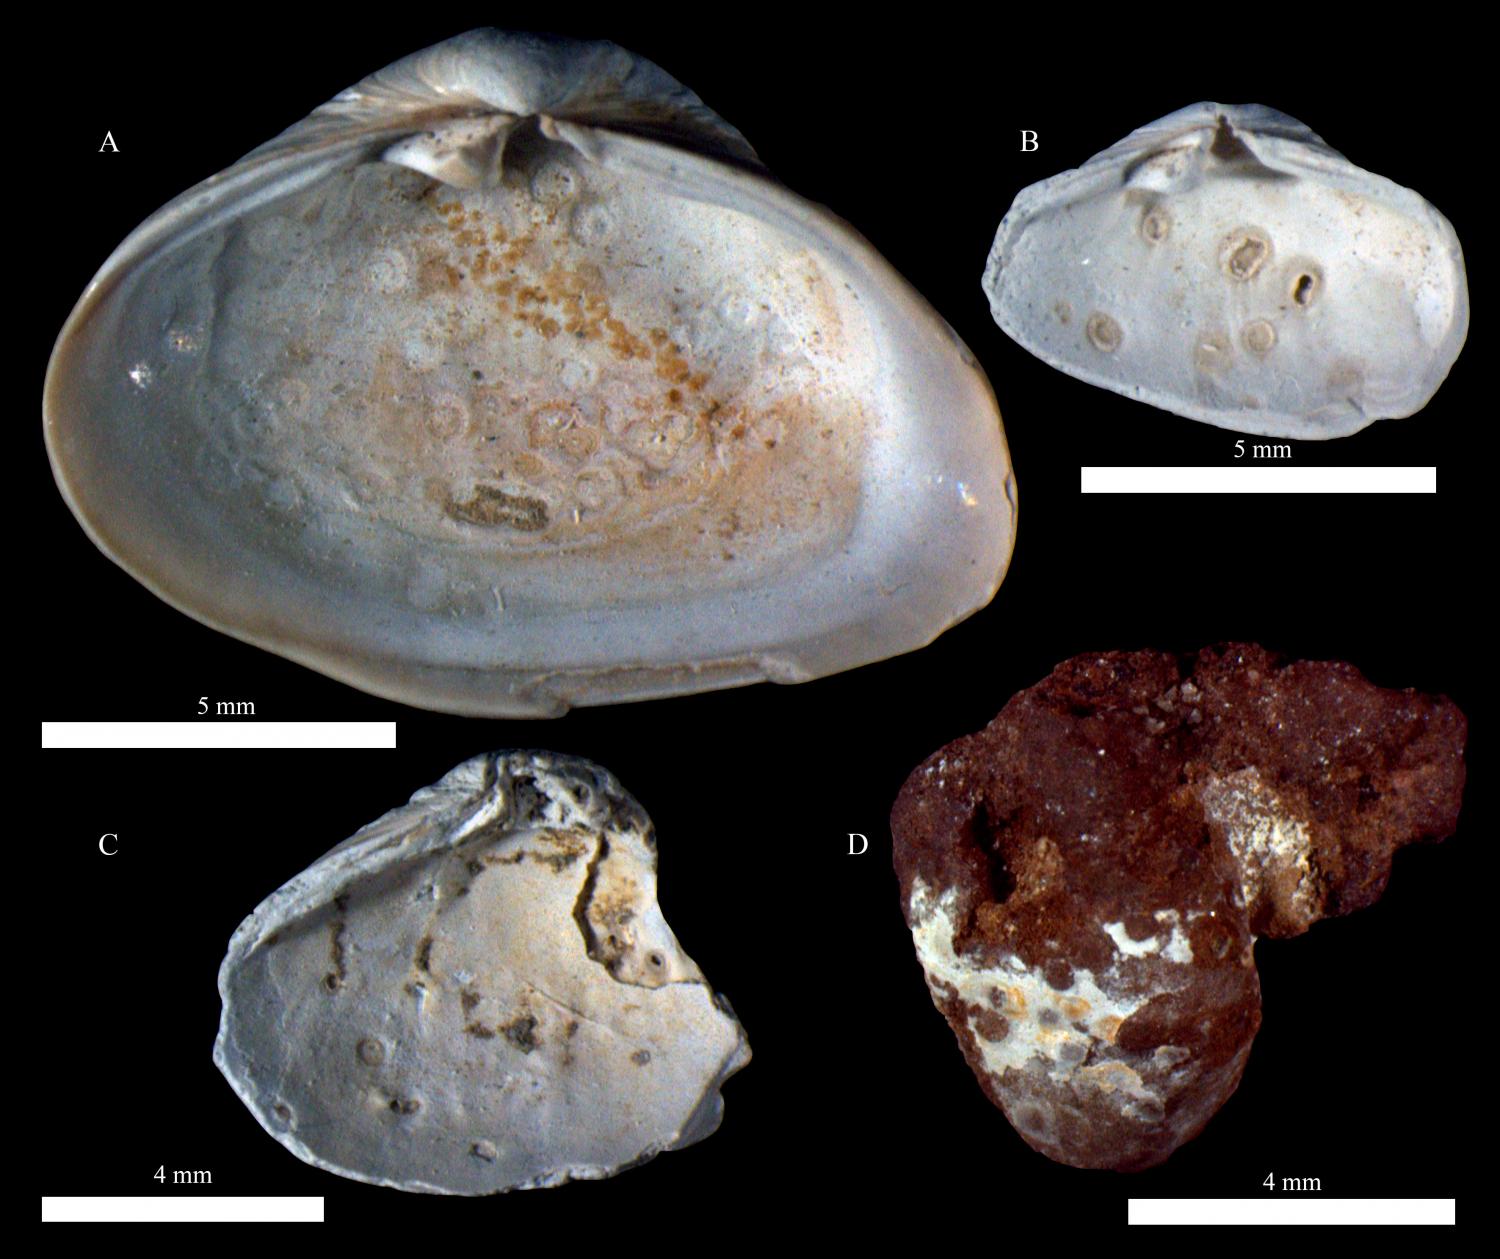 ancient-fossils-reveal-potential-risk-of-rise-in-parasitic-infections-due-to-climate-change